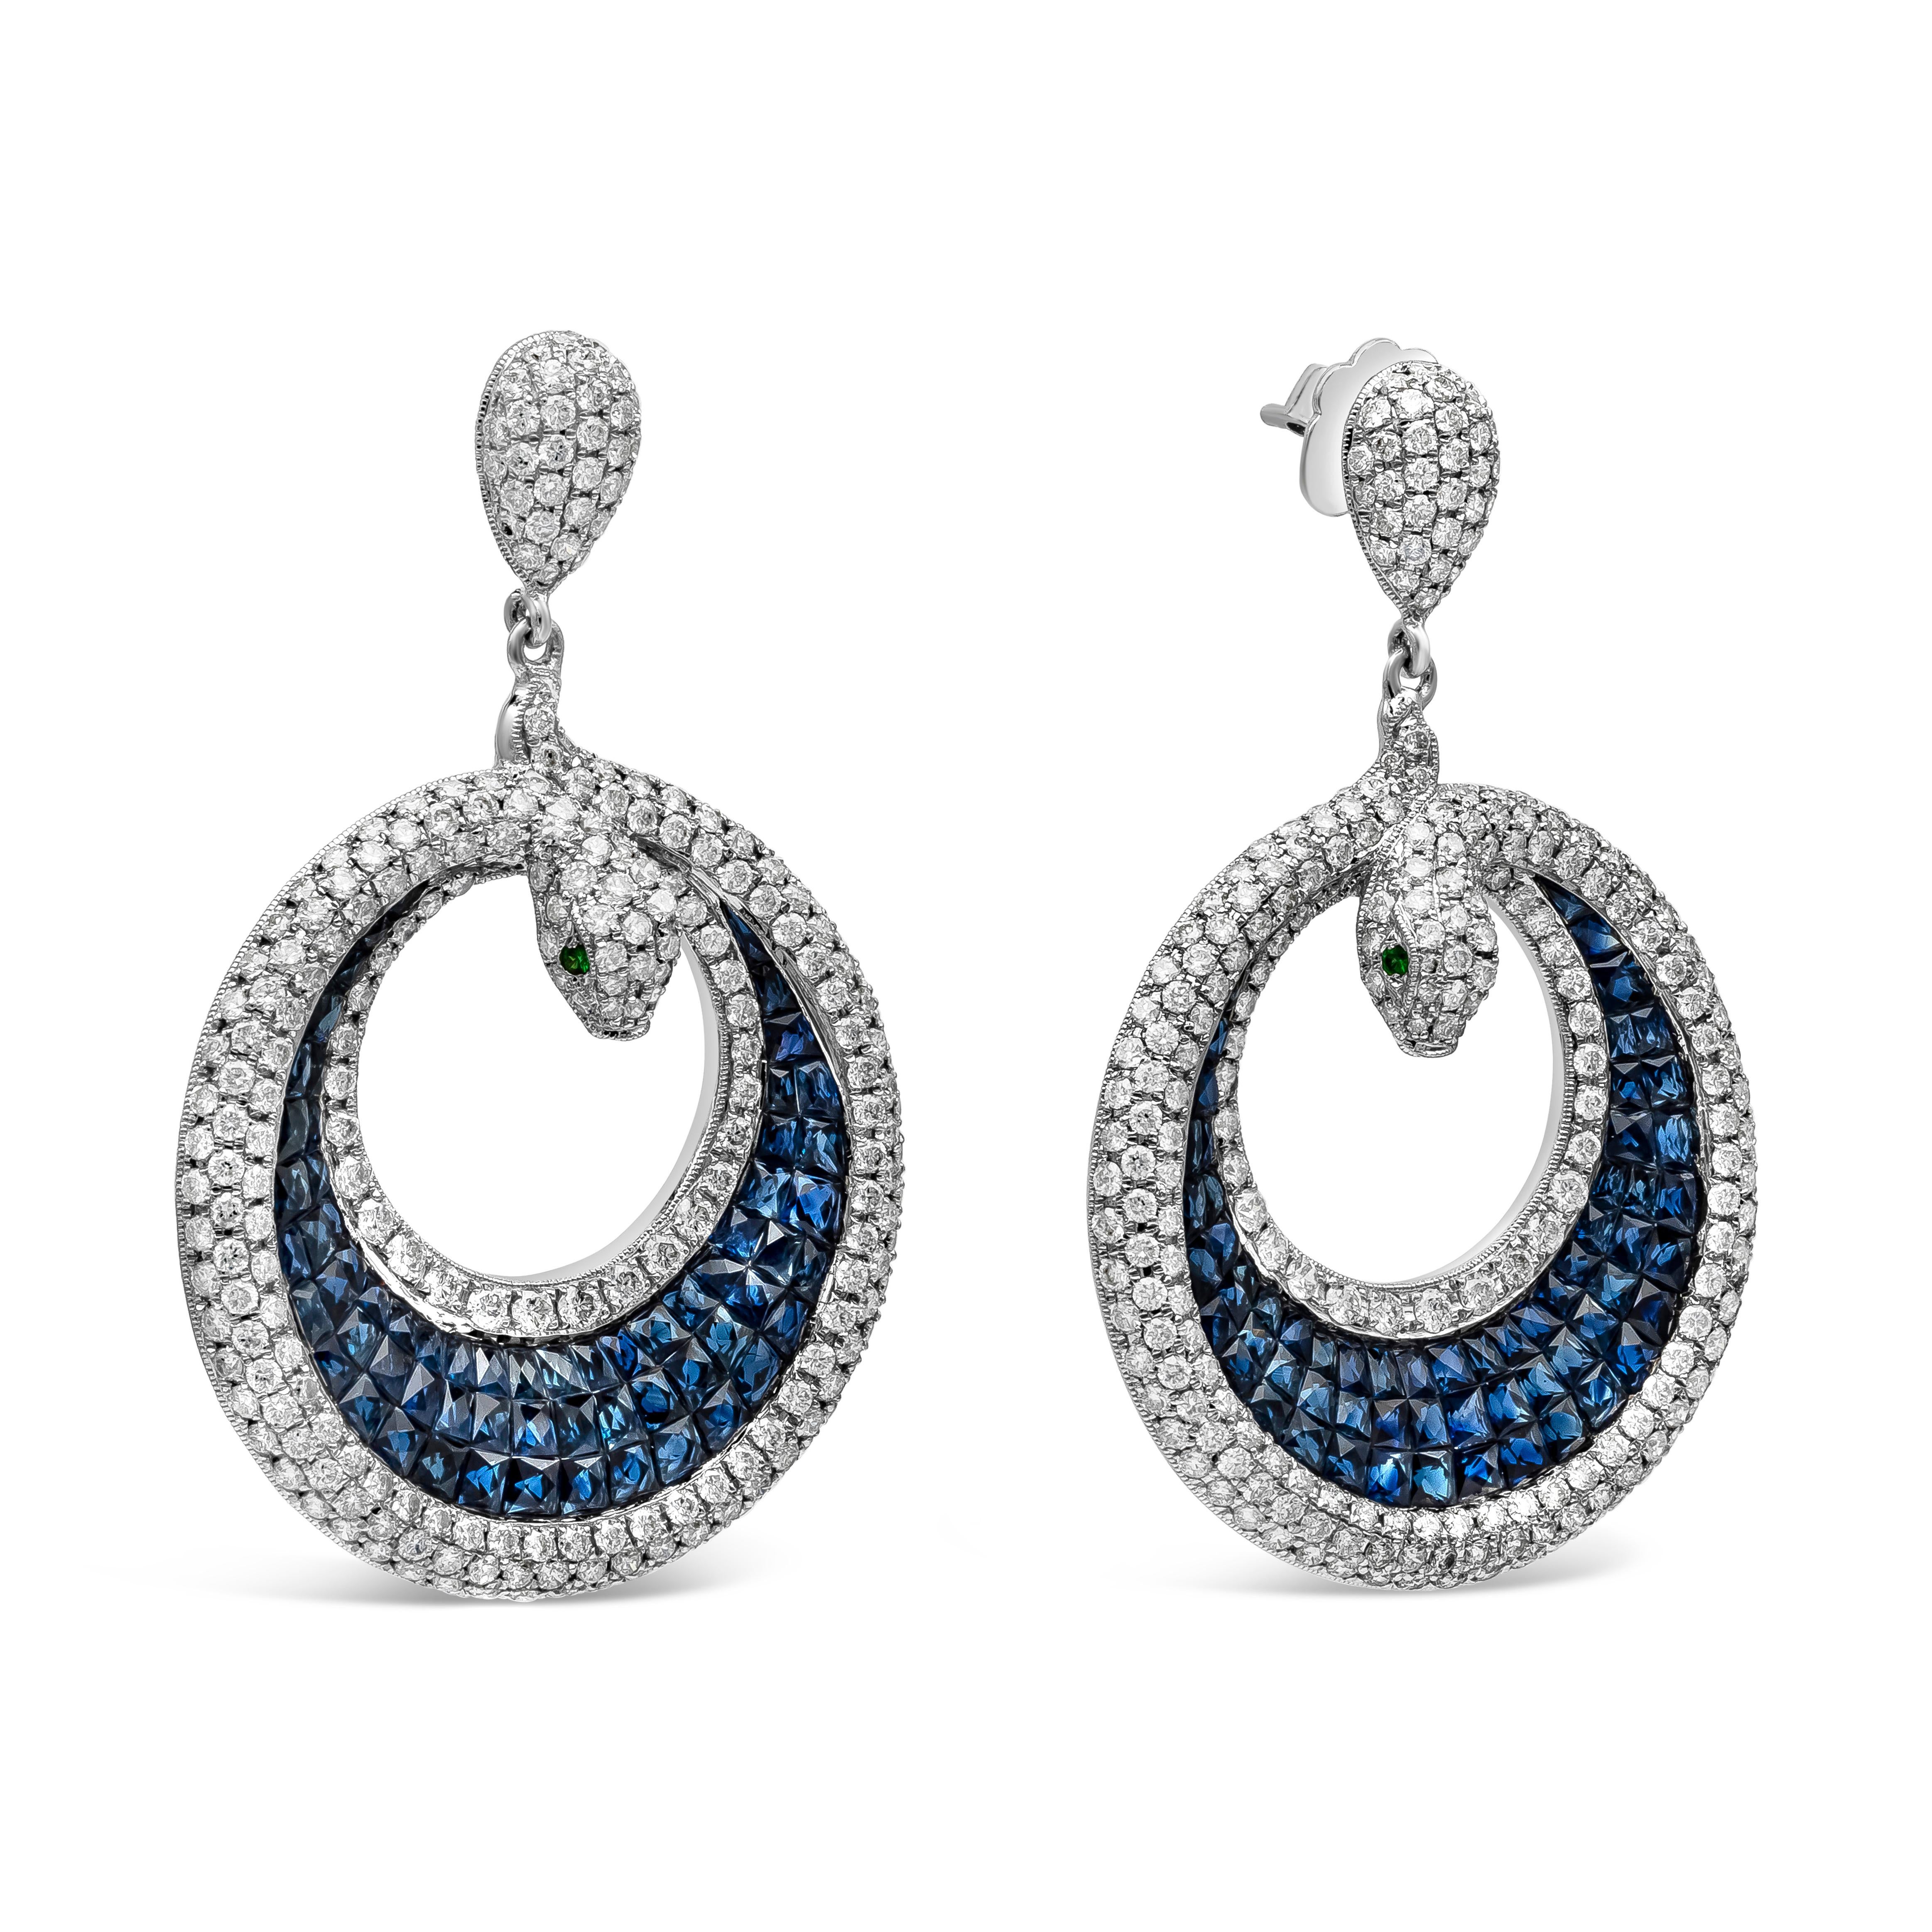 A beautiful and intricately-designed pair of dangle earrings showcasing a cluster of perfectly-matched blue sapphires accented by round brilliant diamonds, set in a beautiful serpent or snake design. The eyes of the snake are round tsavorite garnet